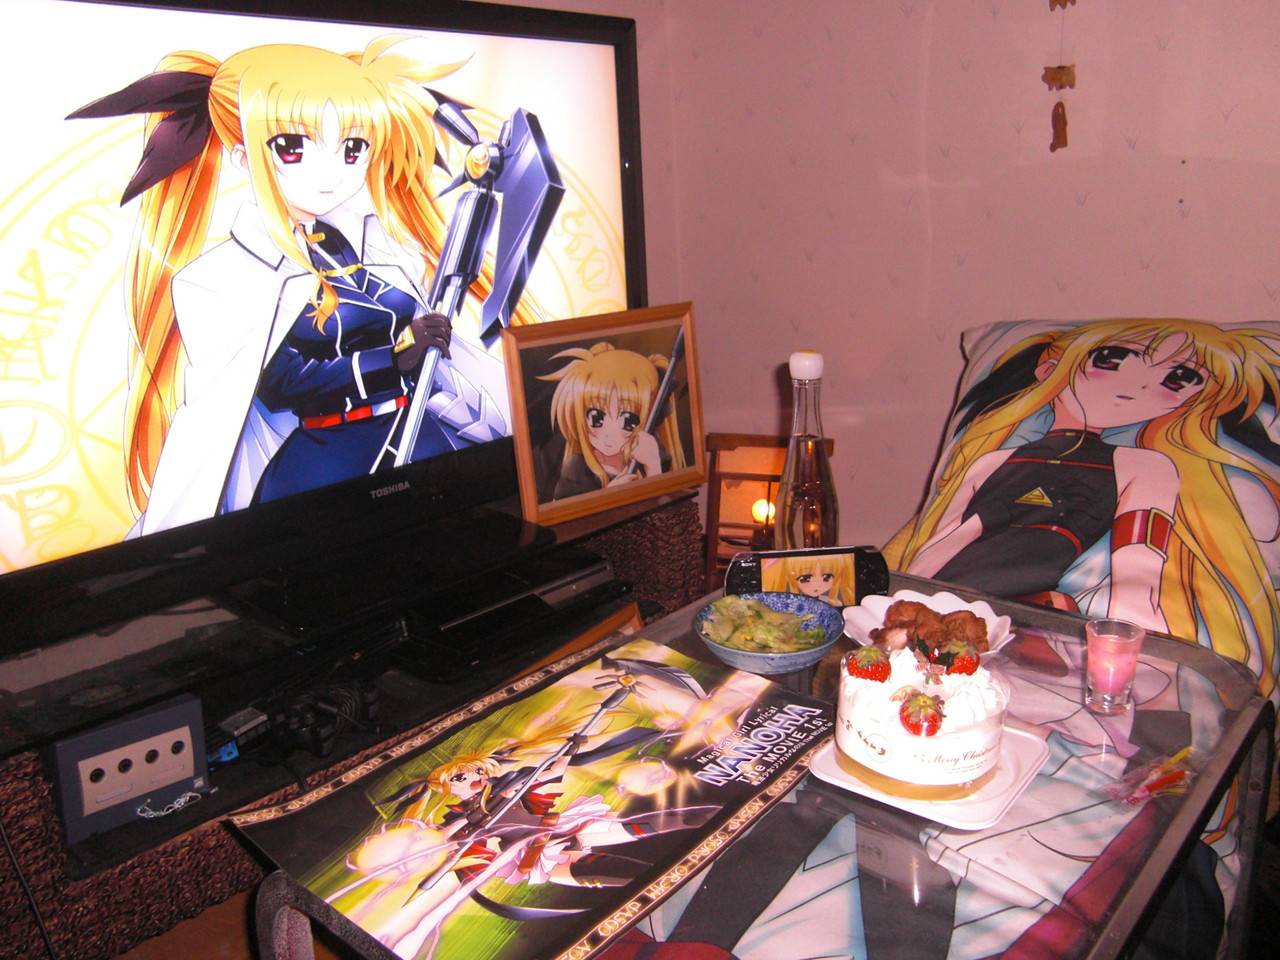 bardiche blonde_hair cake cup fate_testarossa food game_console gamecube lonely lyrical_nanoha mahou_shoujo_lyrical_nanoha mahou_shoujo_lyrical_nanoha_a's mahou_shoujo_lyrical_nanoha_strikers meal no_humans otaku_room photo playstation_3 product_placement television twintails